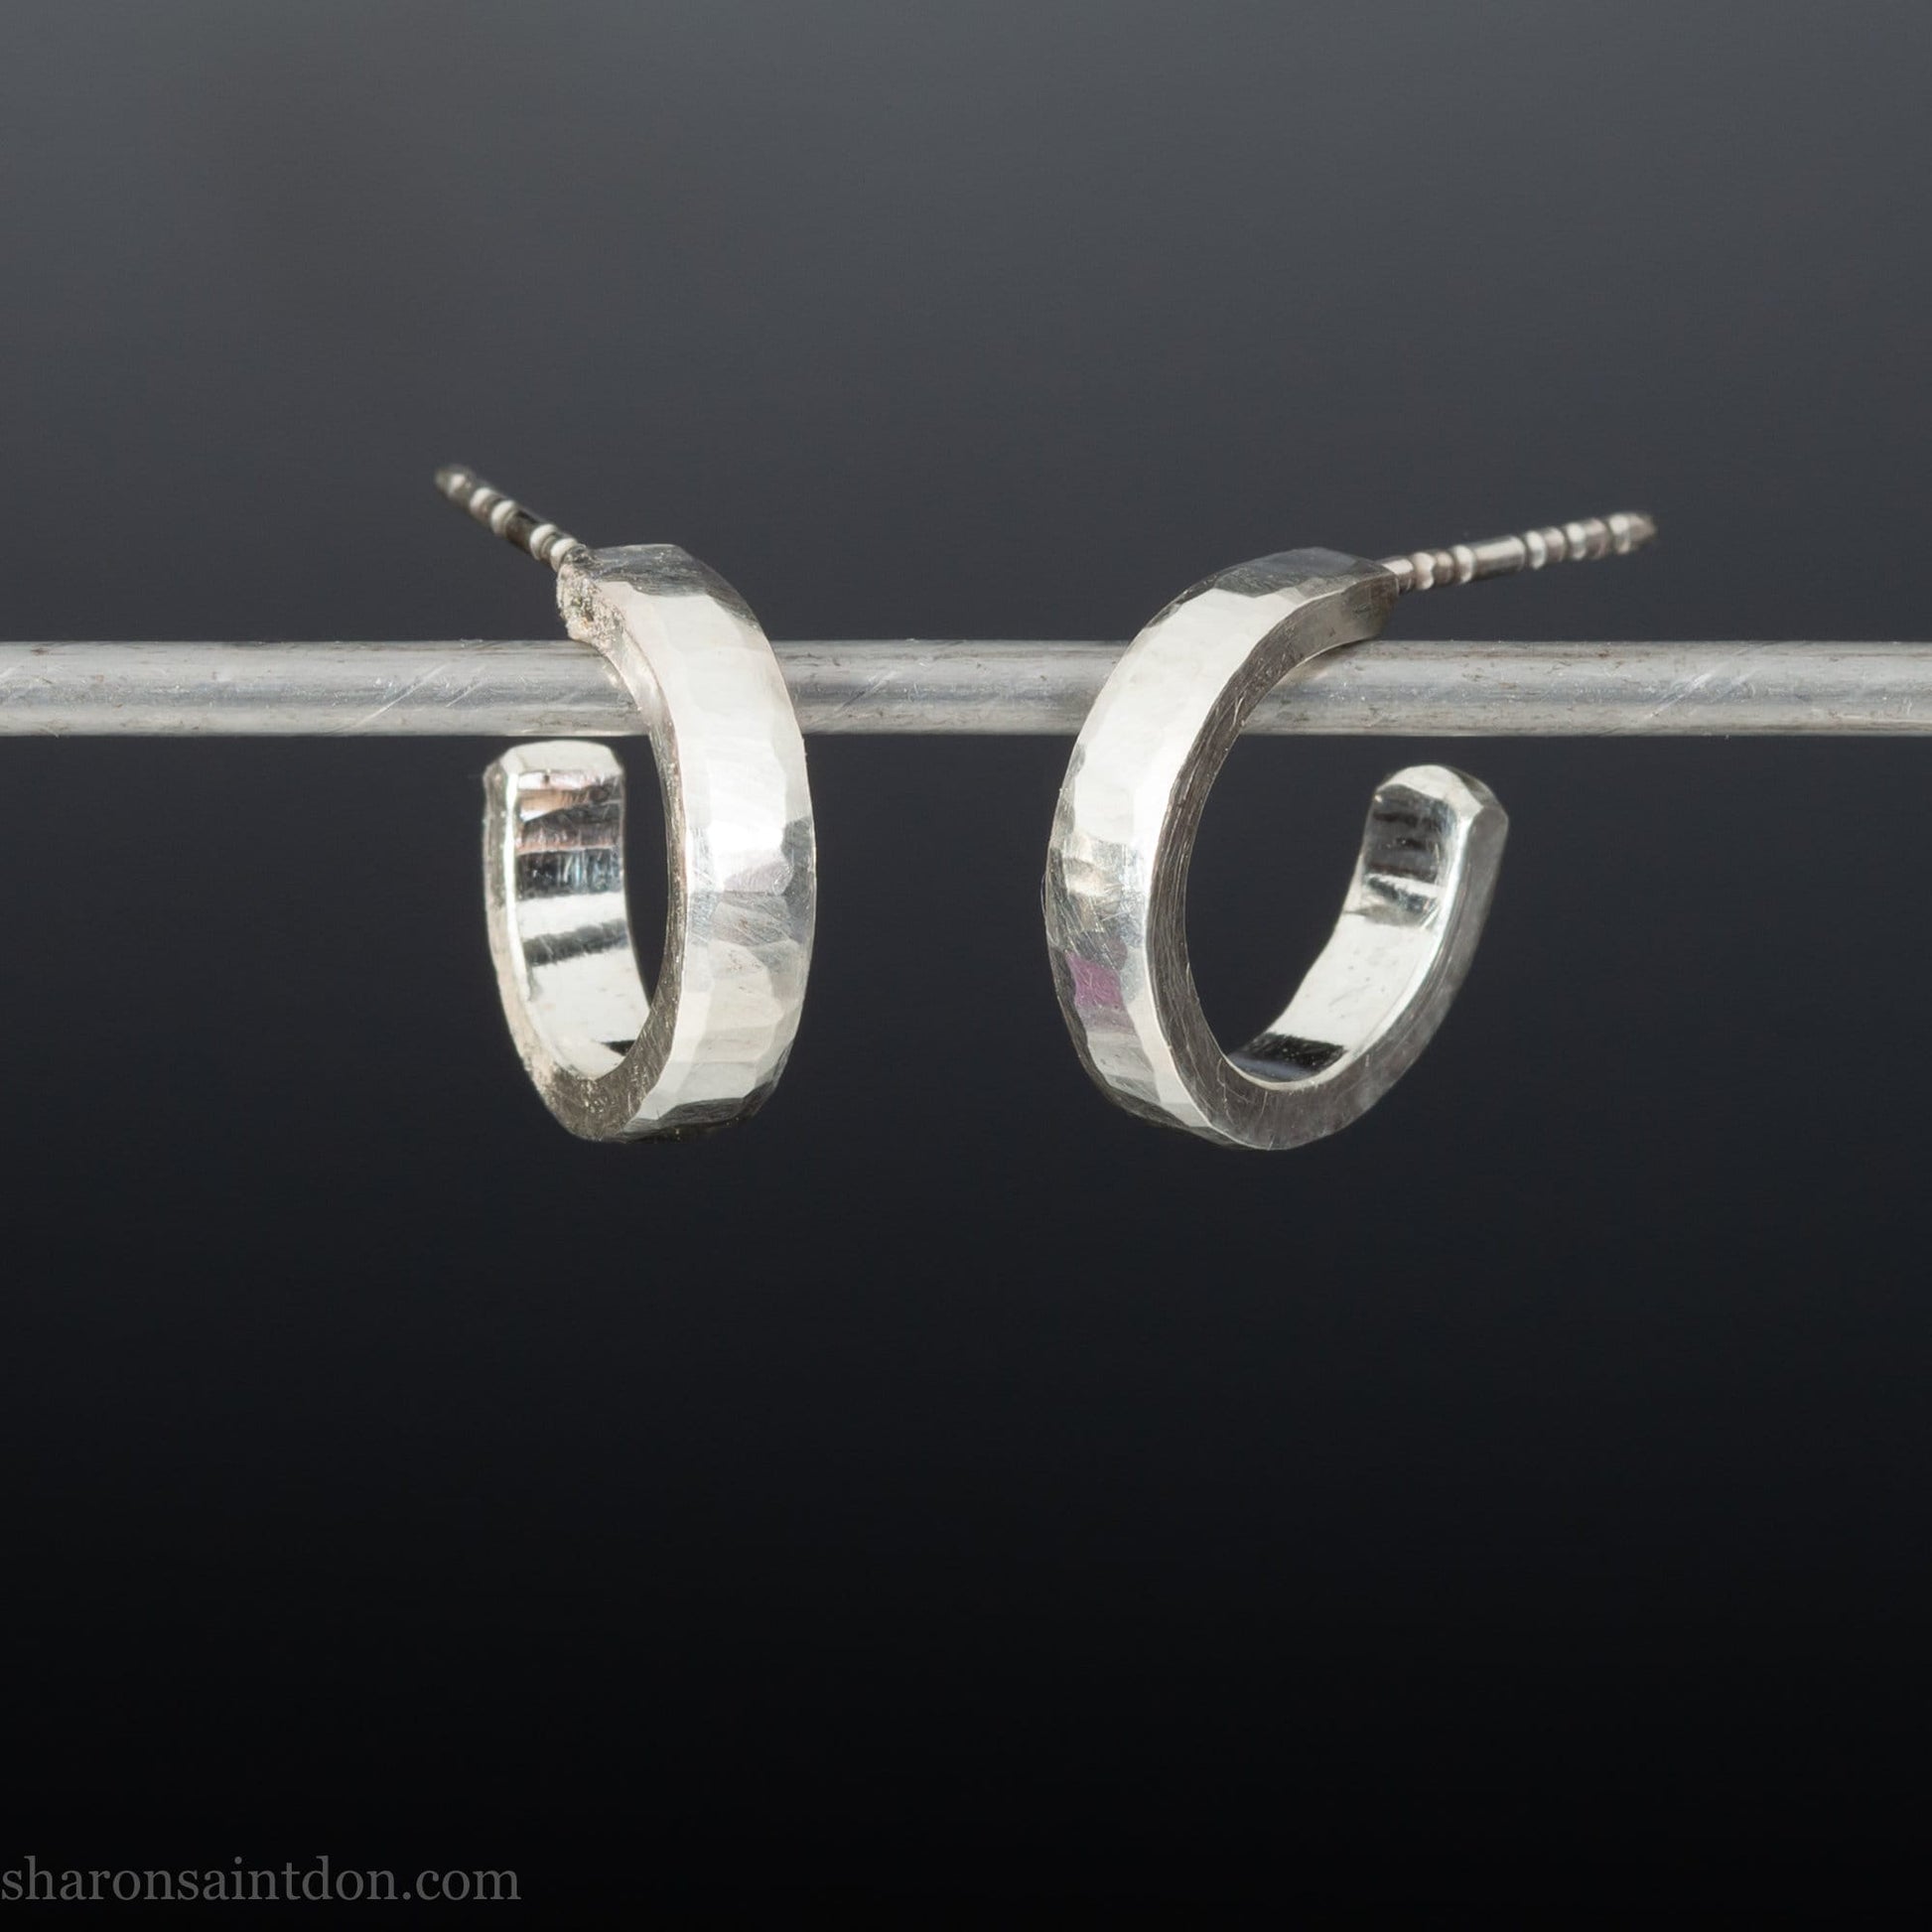 925 sterling silver hoop earrings handmade in North America by Sharon SaintDon. Small, shiny, 16mm x 3mm round with hammered texture.